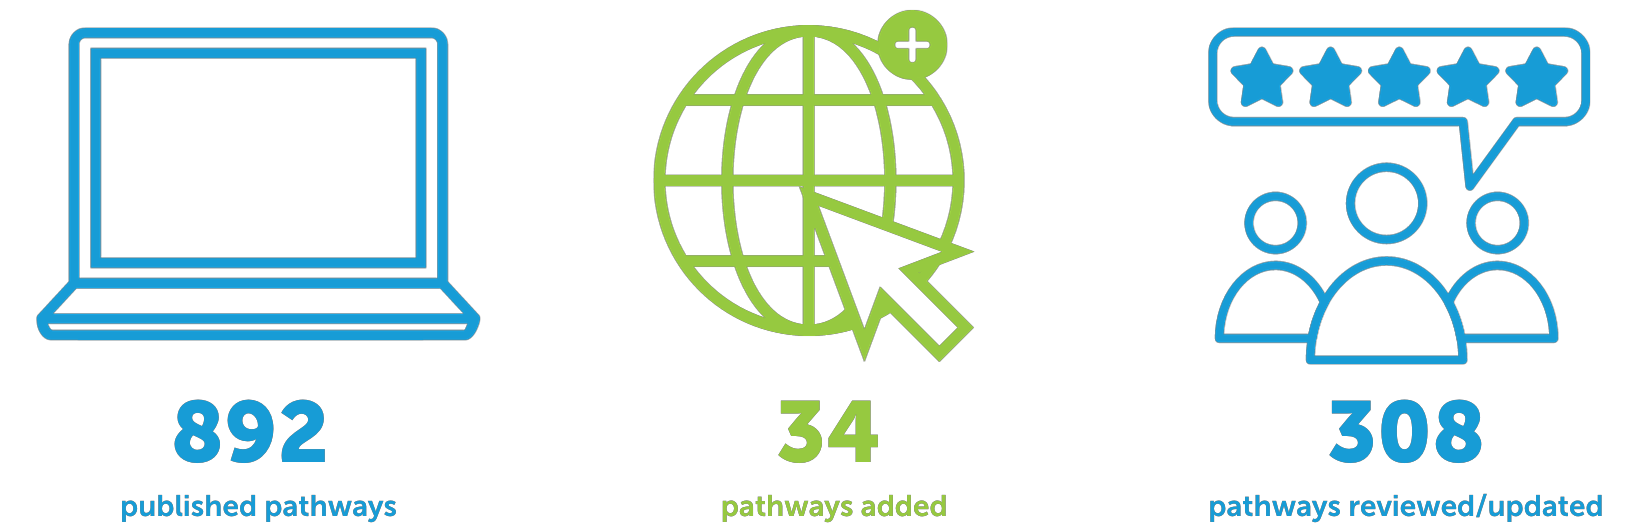 HealthPathways highlights for 2022-2023.